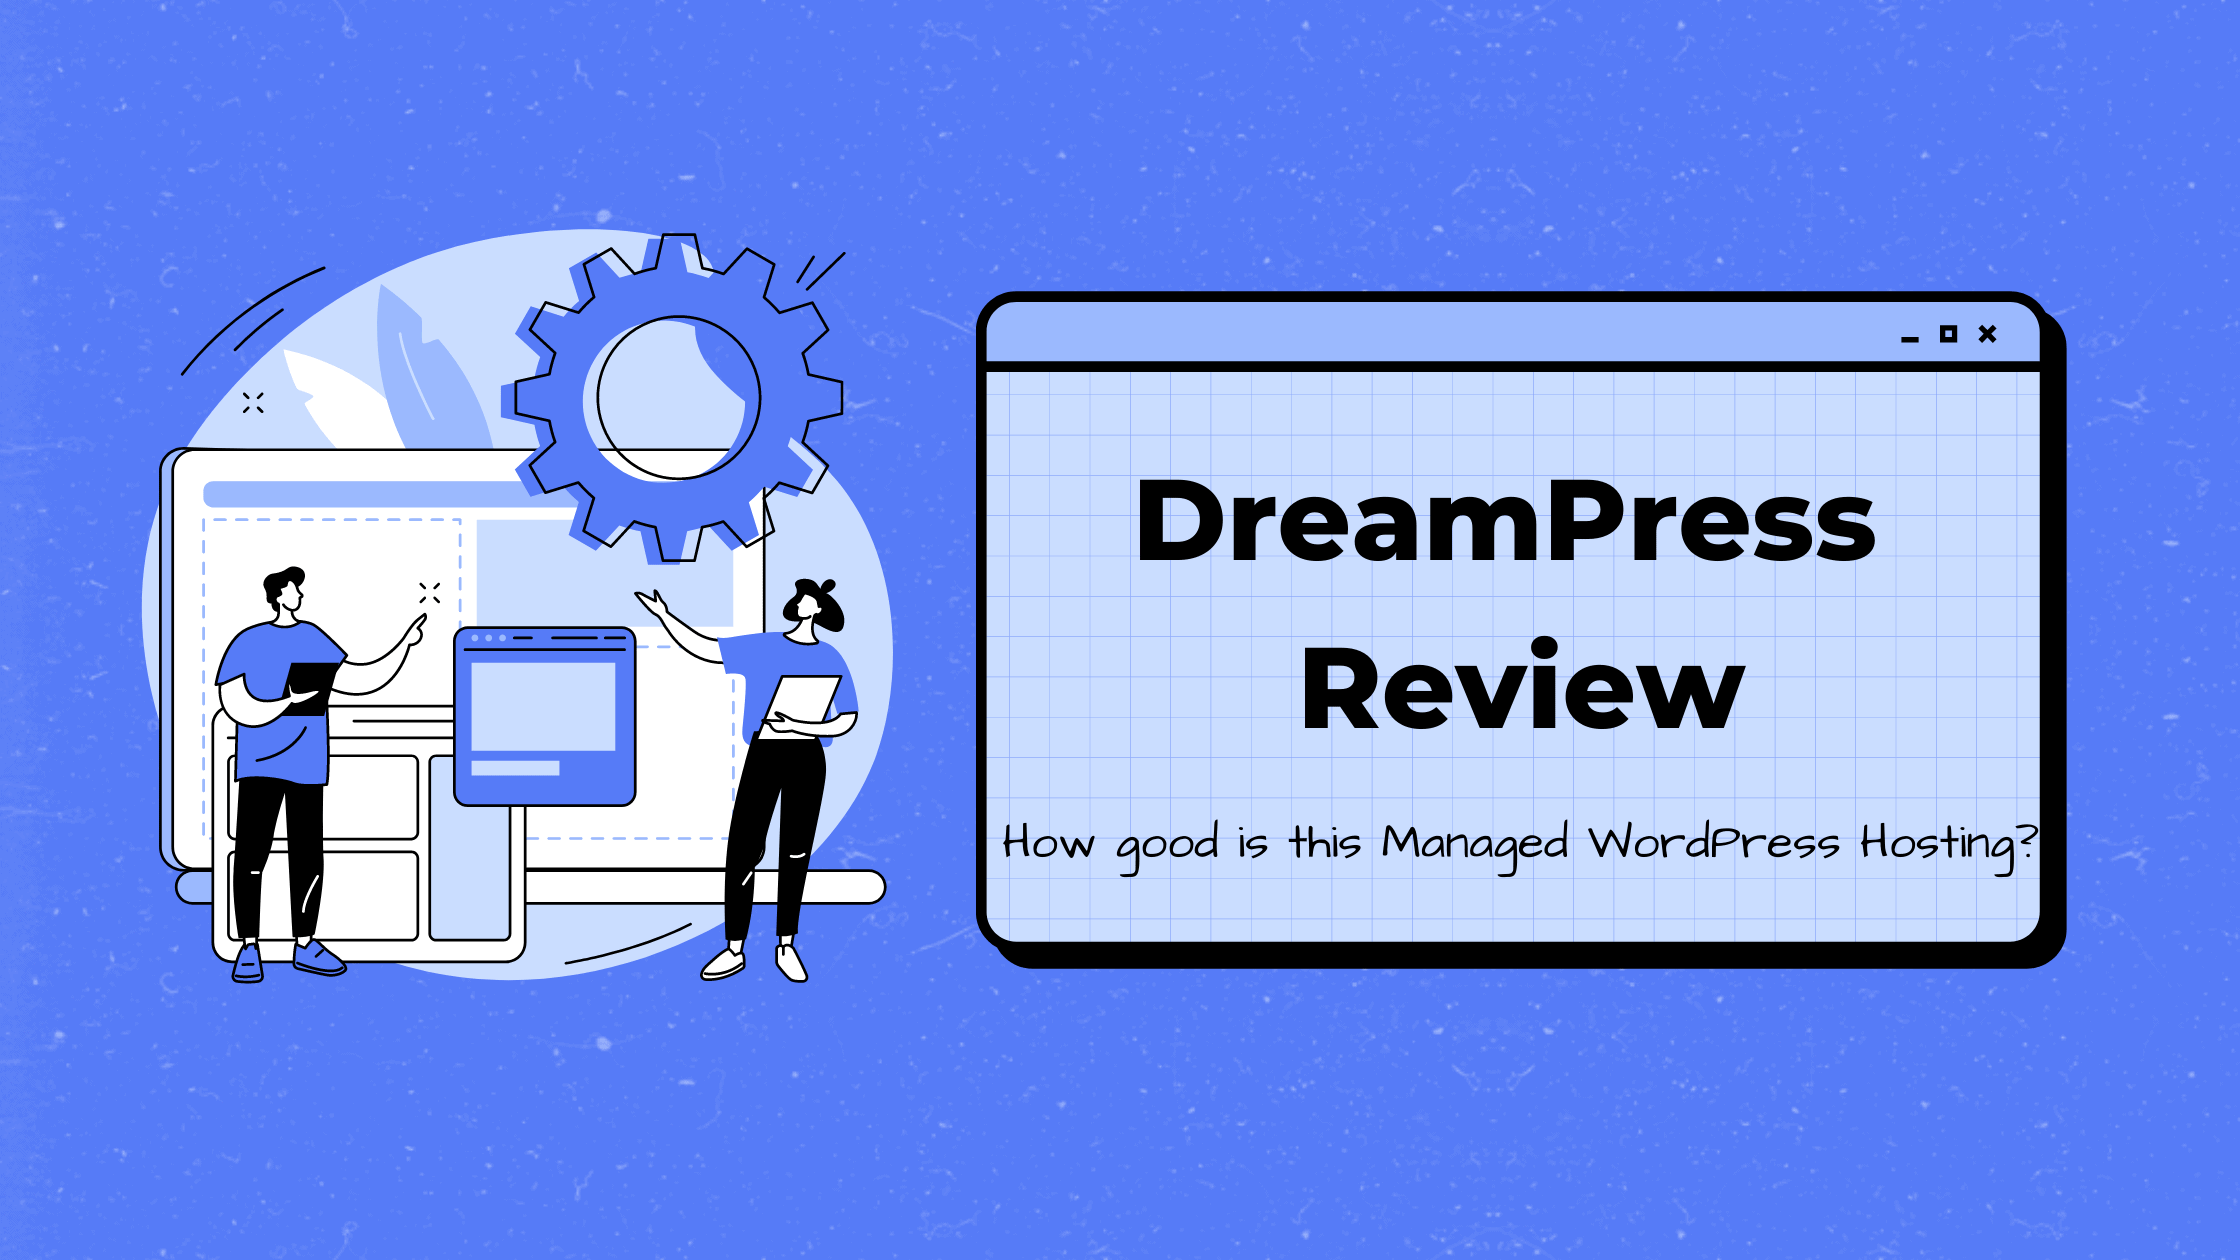 Review of DreamPress Managed WordPress Hosting